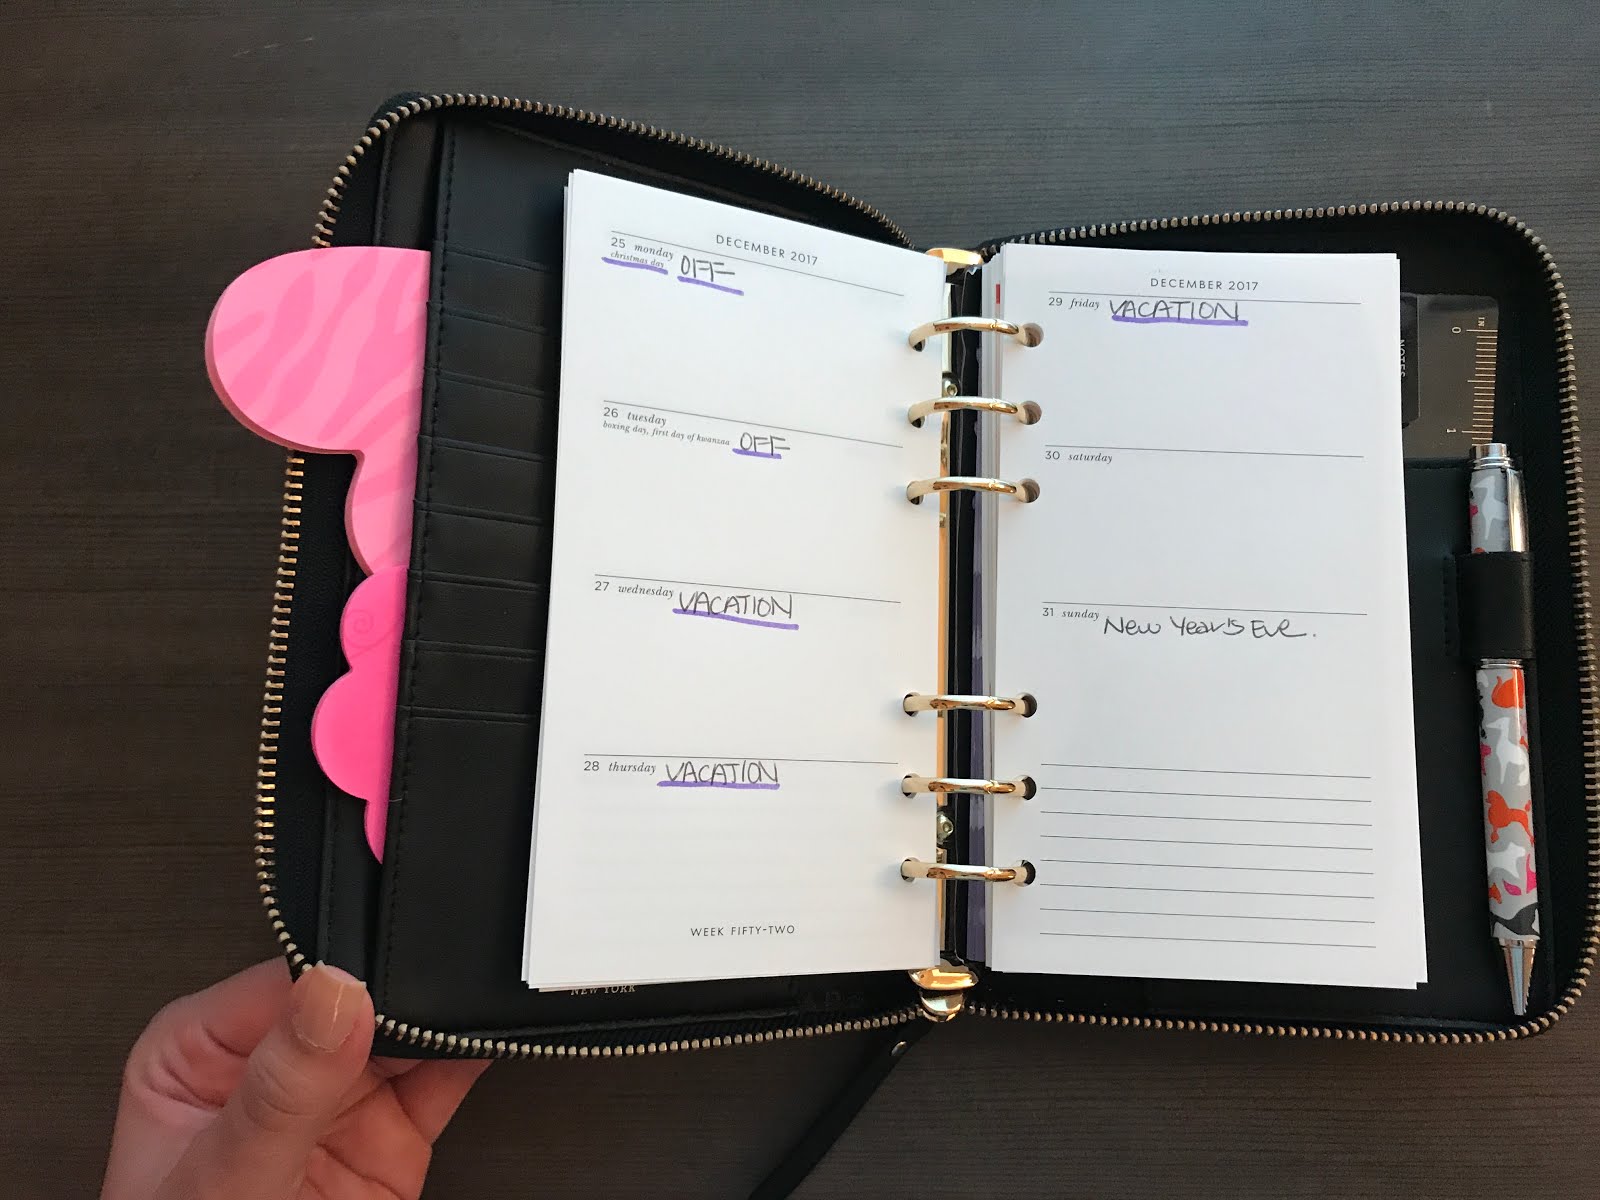 Kate Spade Planner Review